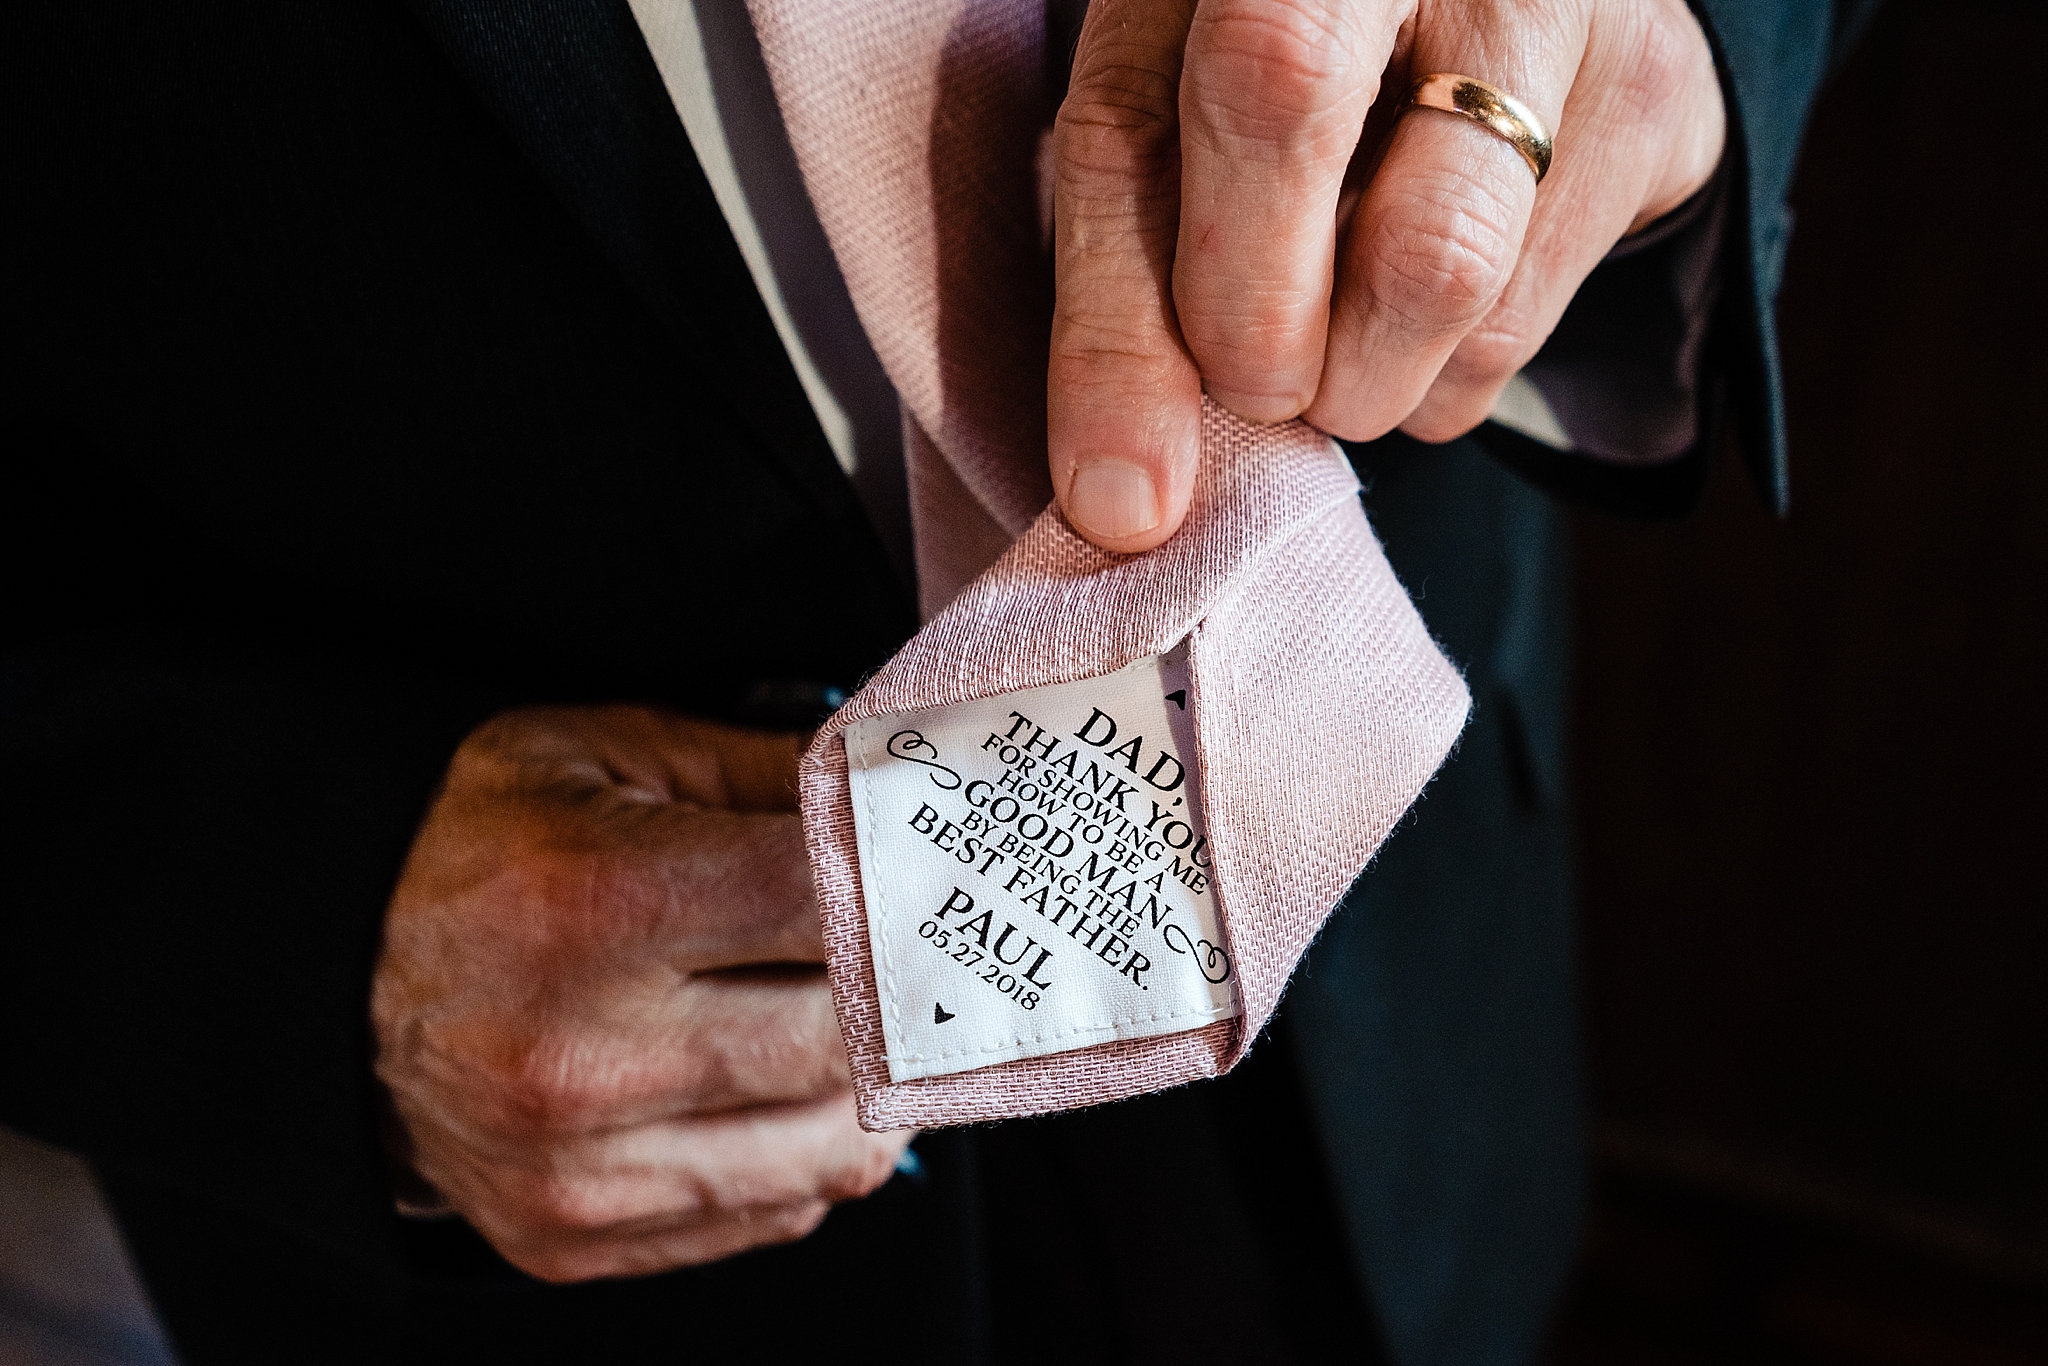 Gift for Father of the Groom is a tie with a special message embroidered in the back